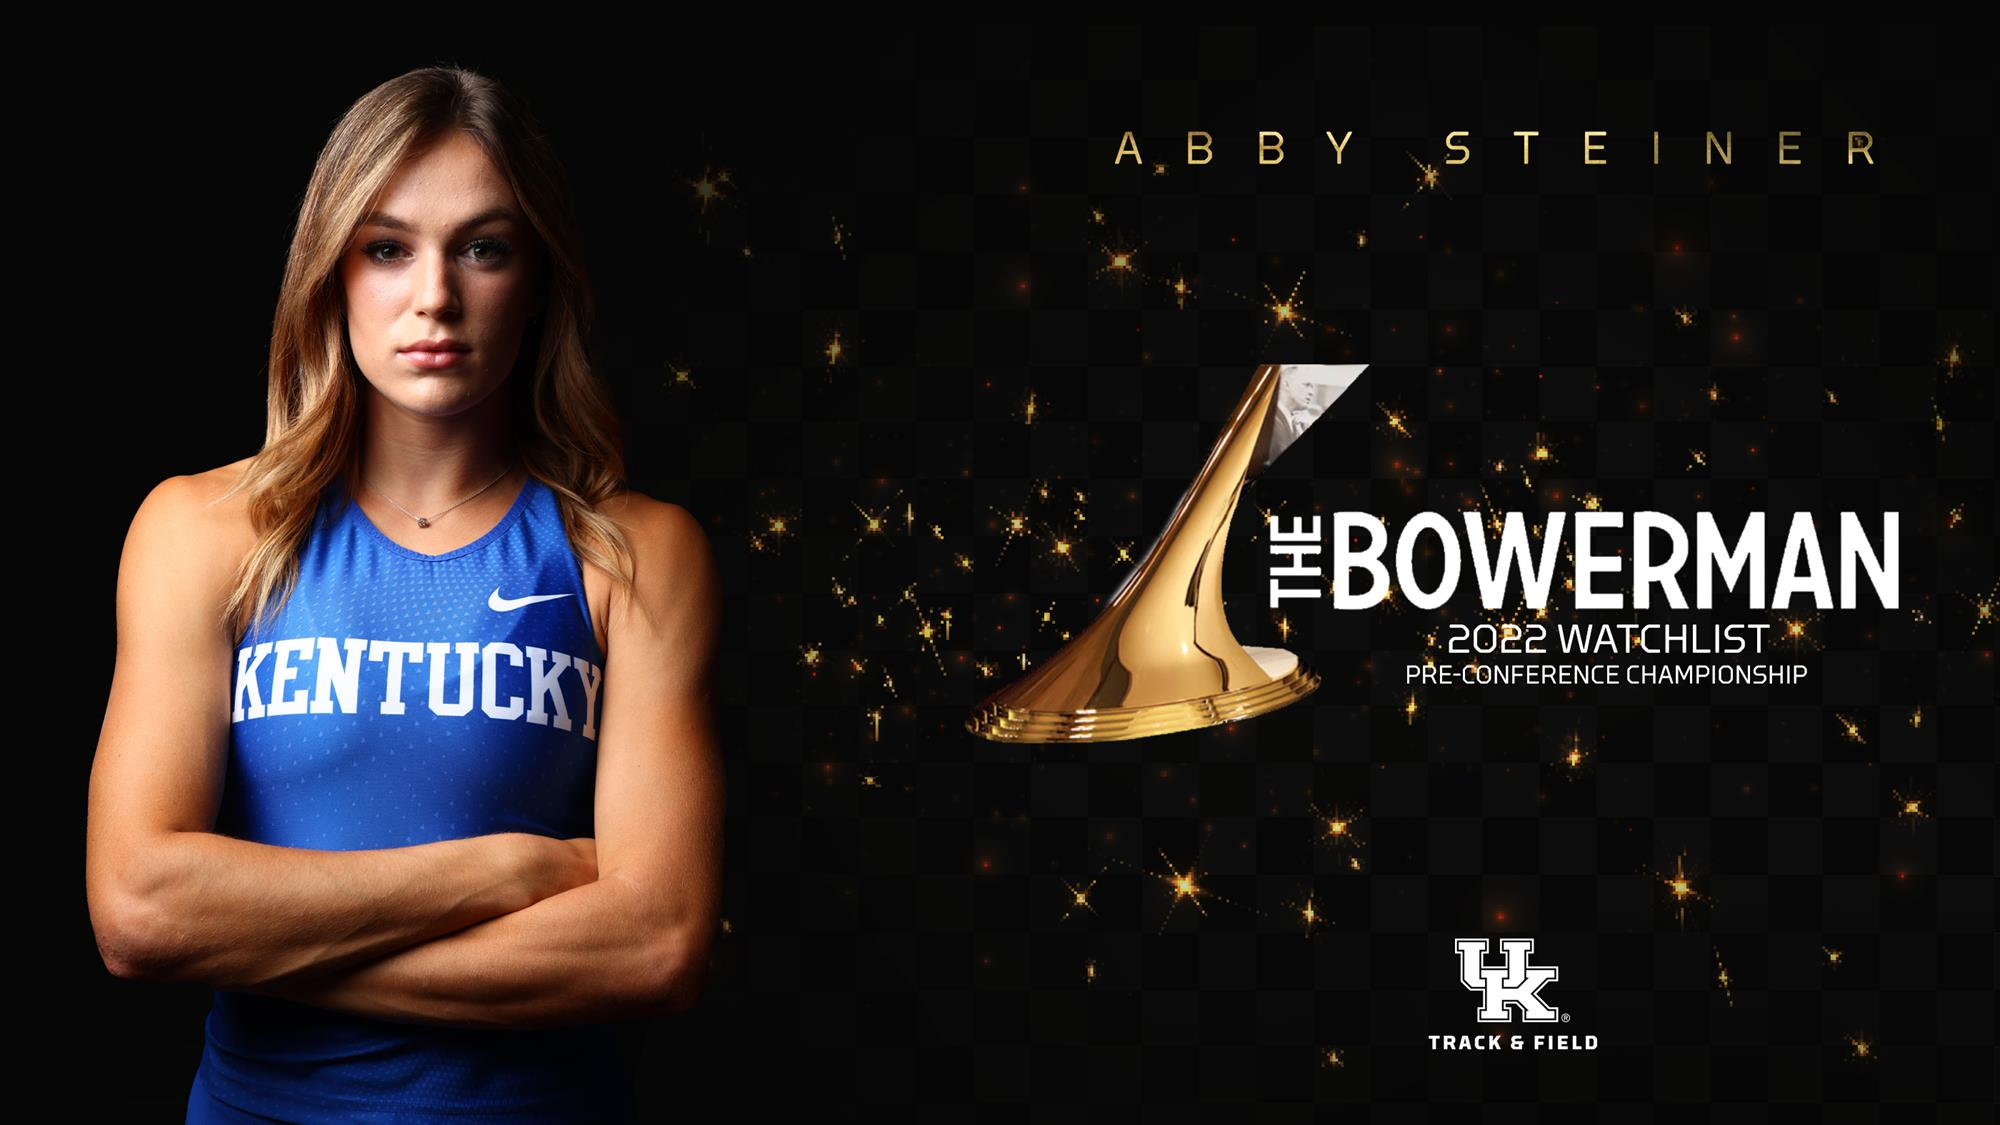 Abby Steiner Remains on Bowerman Watch List